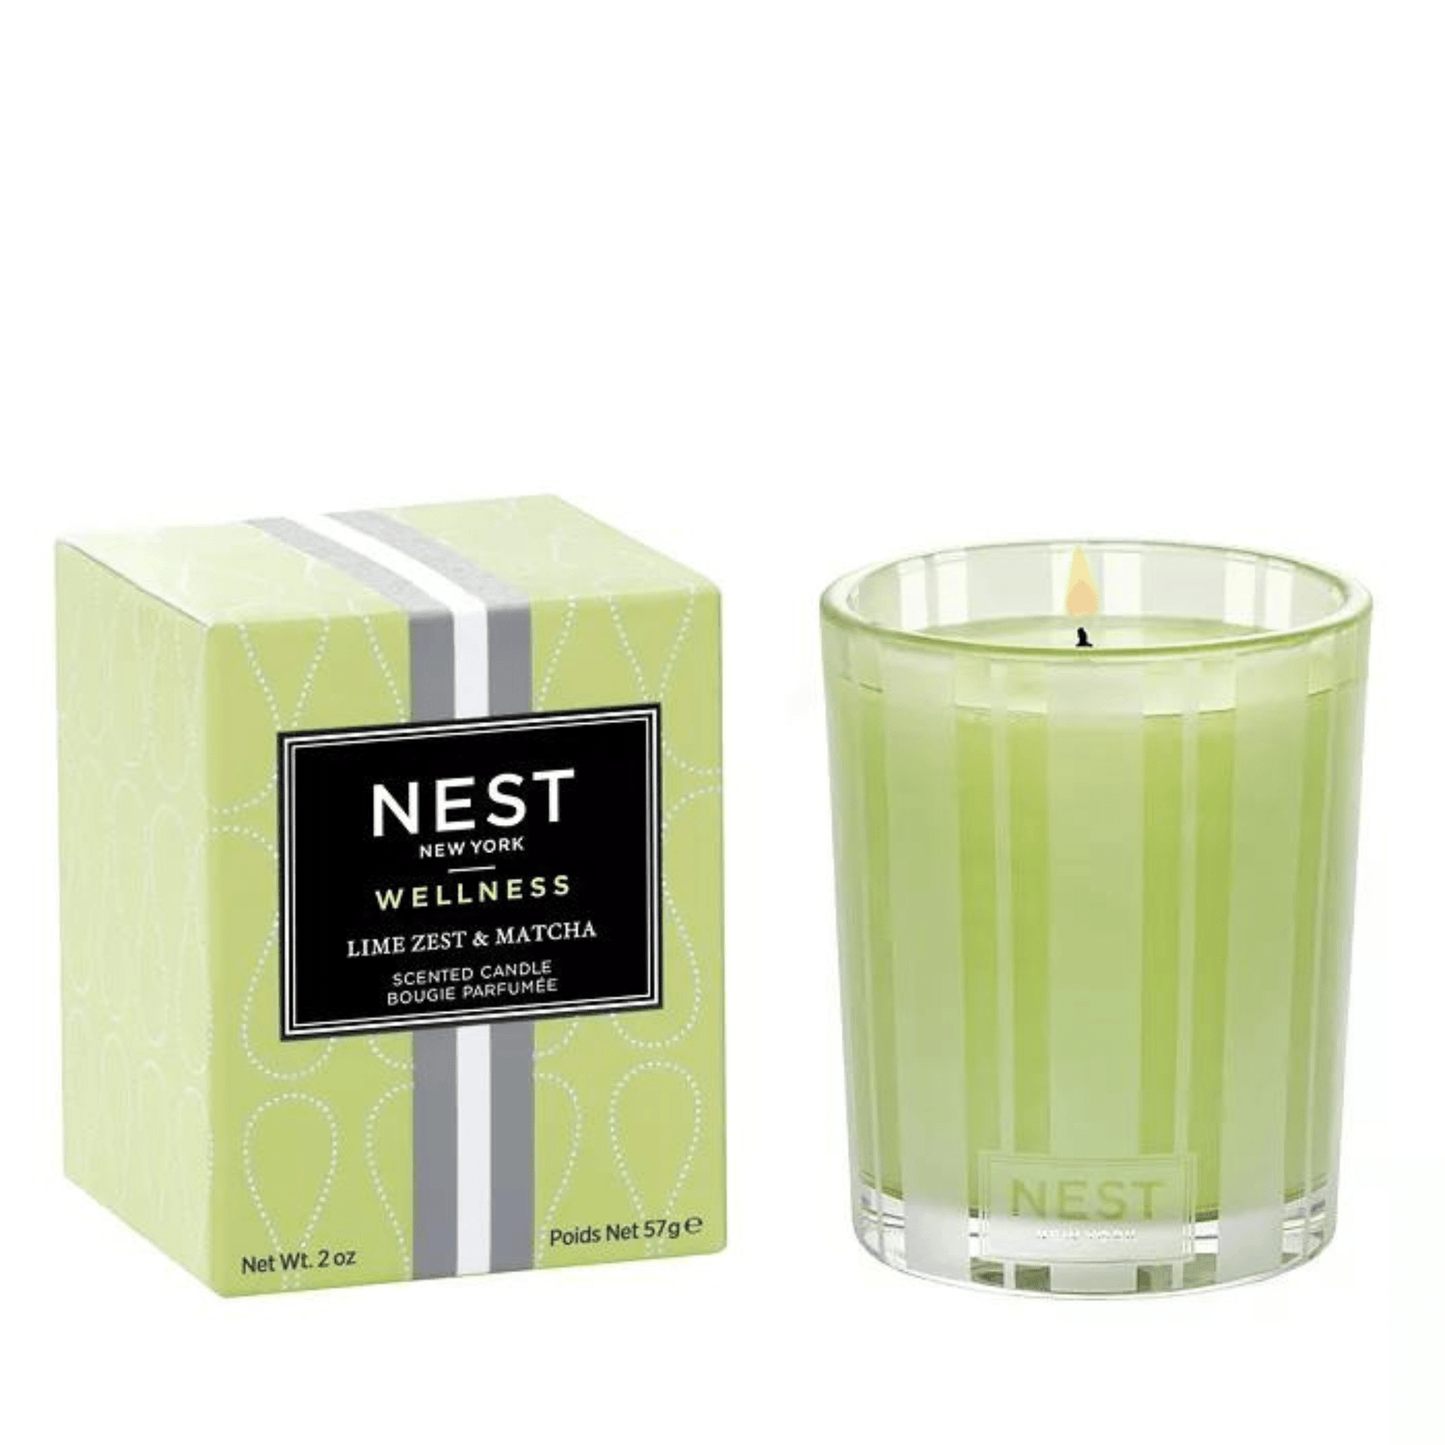 Primary Image of Lime Zest Matcha Votive Candle